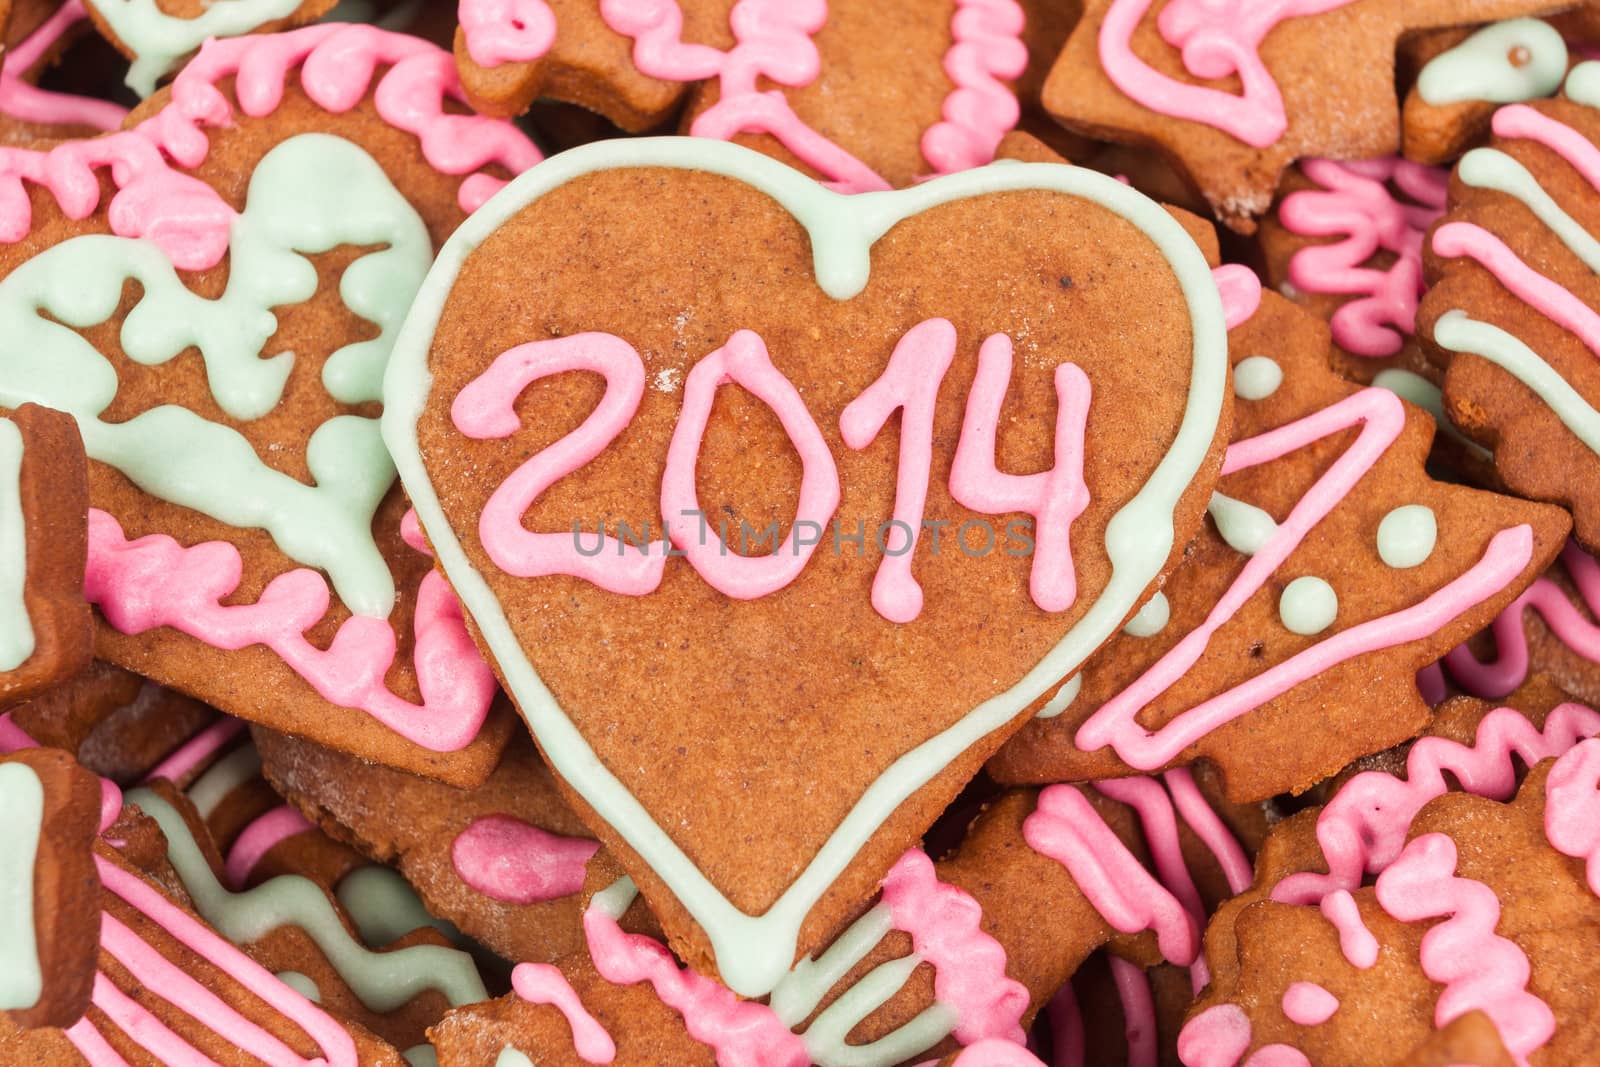 Homemade new year cookies with 2014 number - heart shape